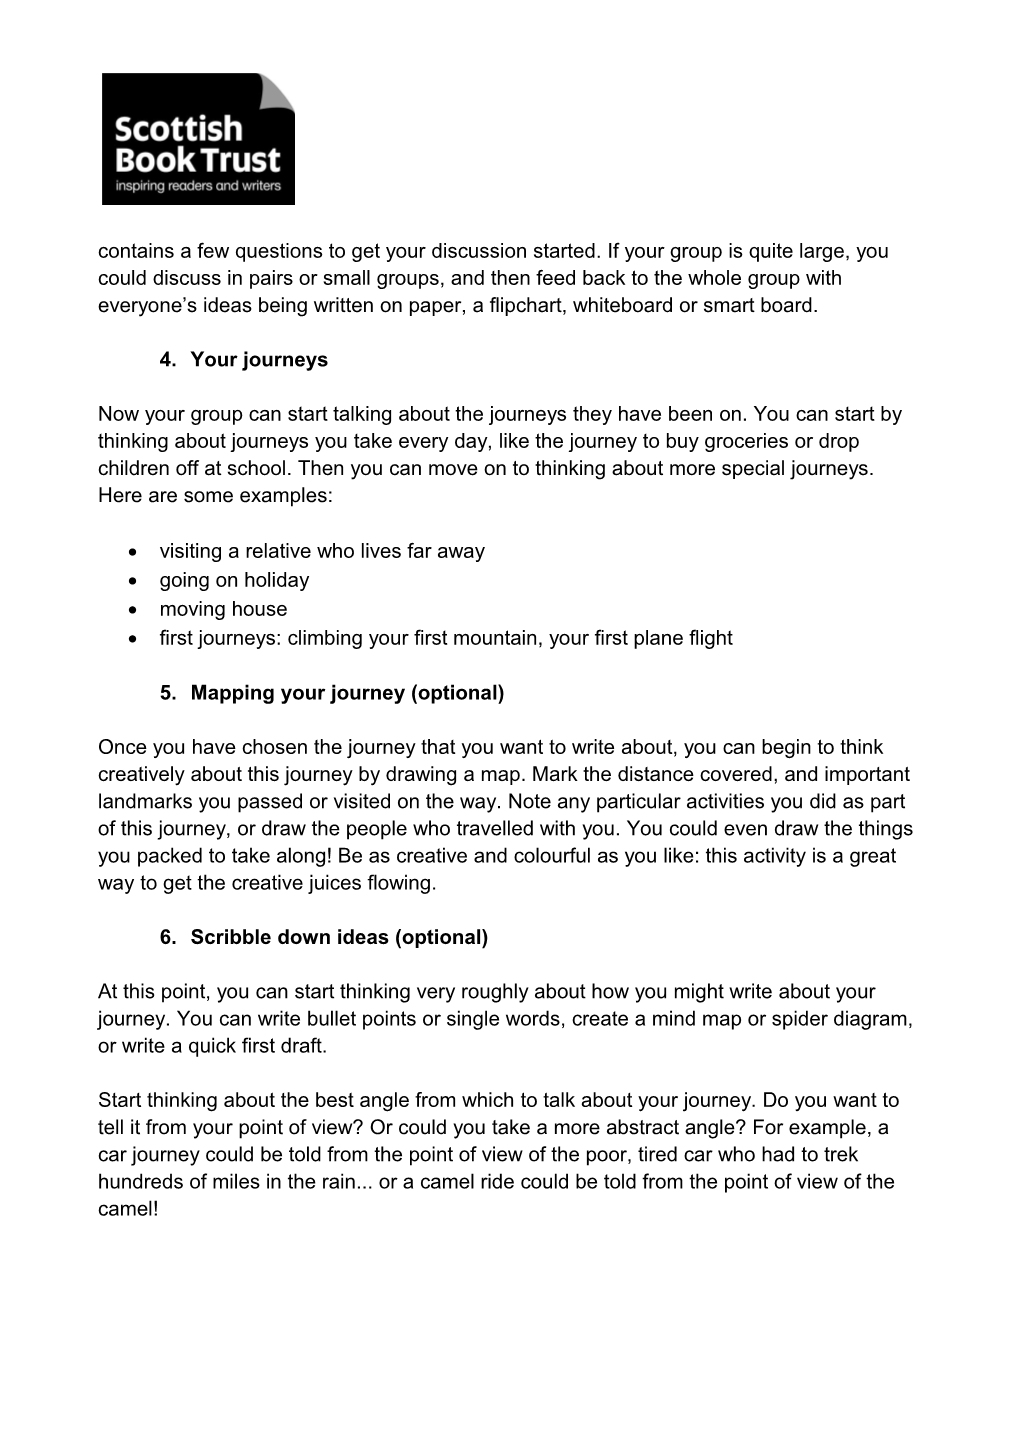 A 10-Step Guide to Running a Creative Writing Workshop on Journeys